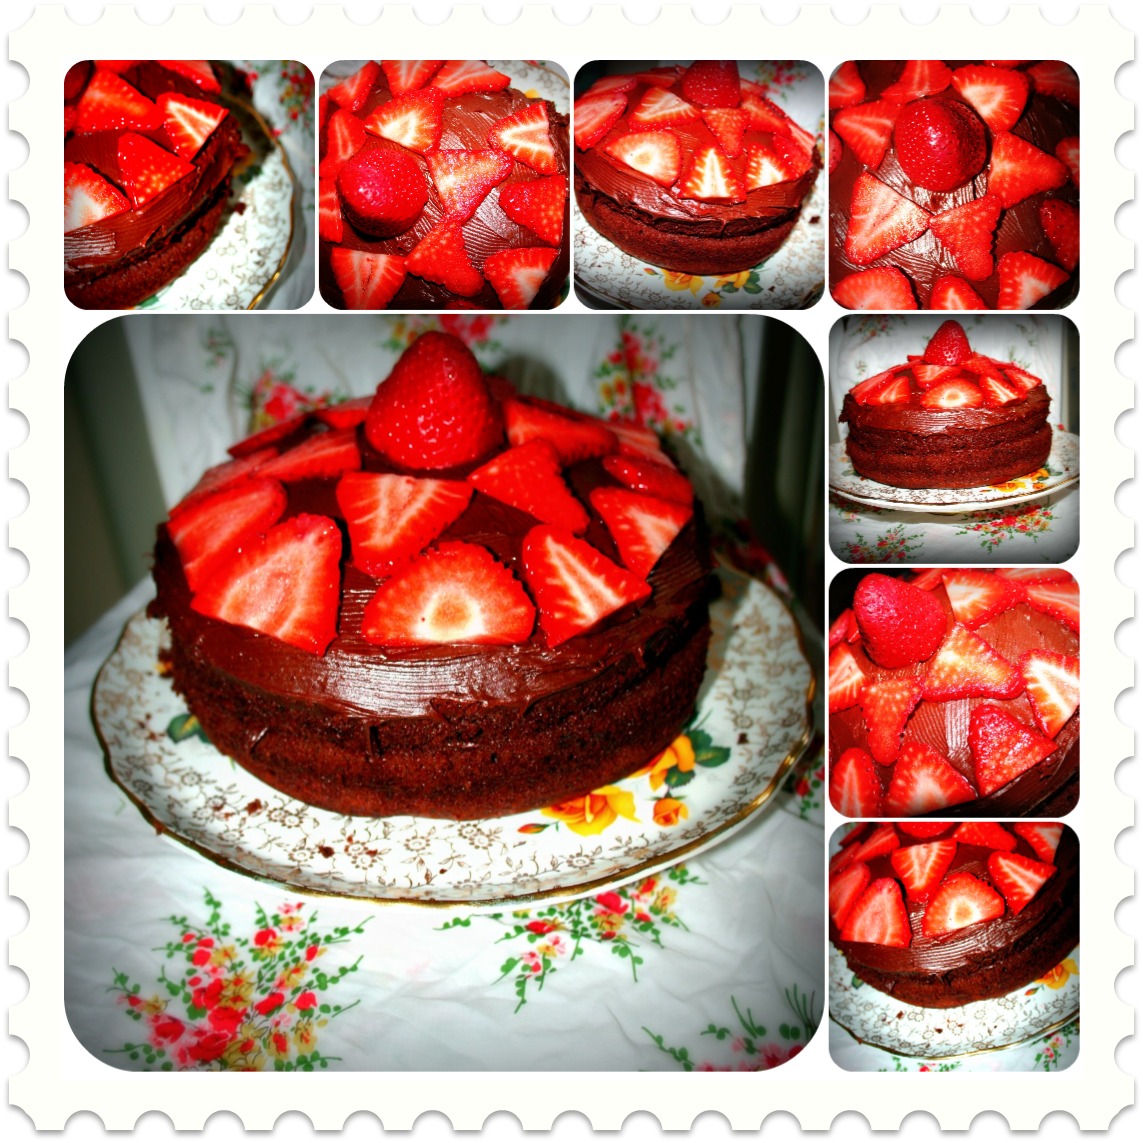 fancy chocolate cake images Chocolate and Strawberry Cake